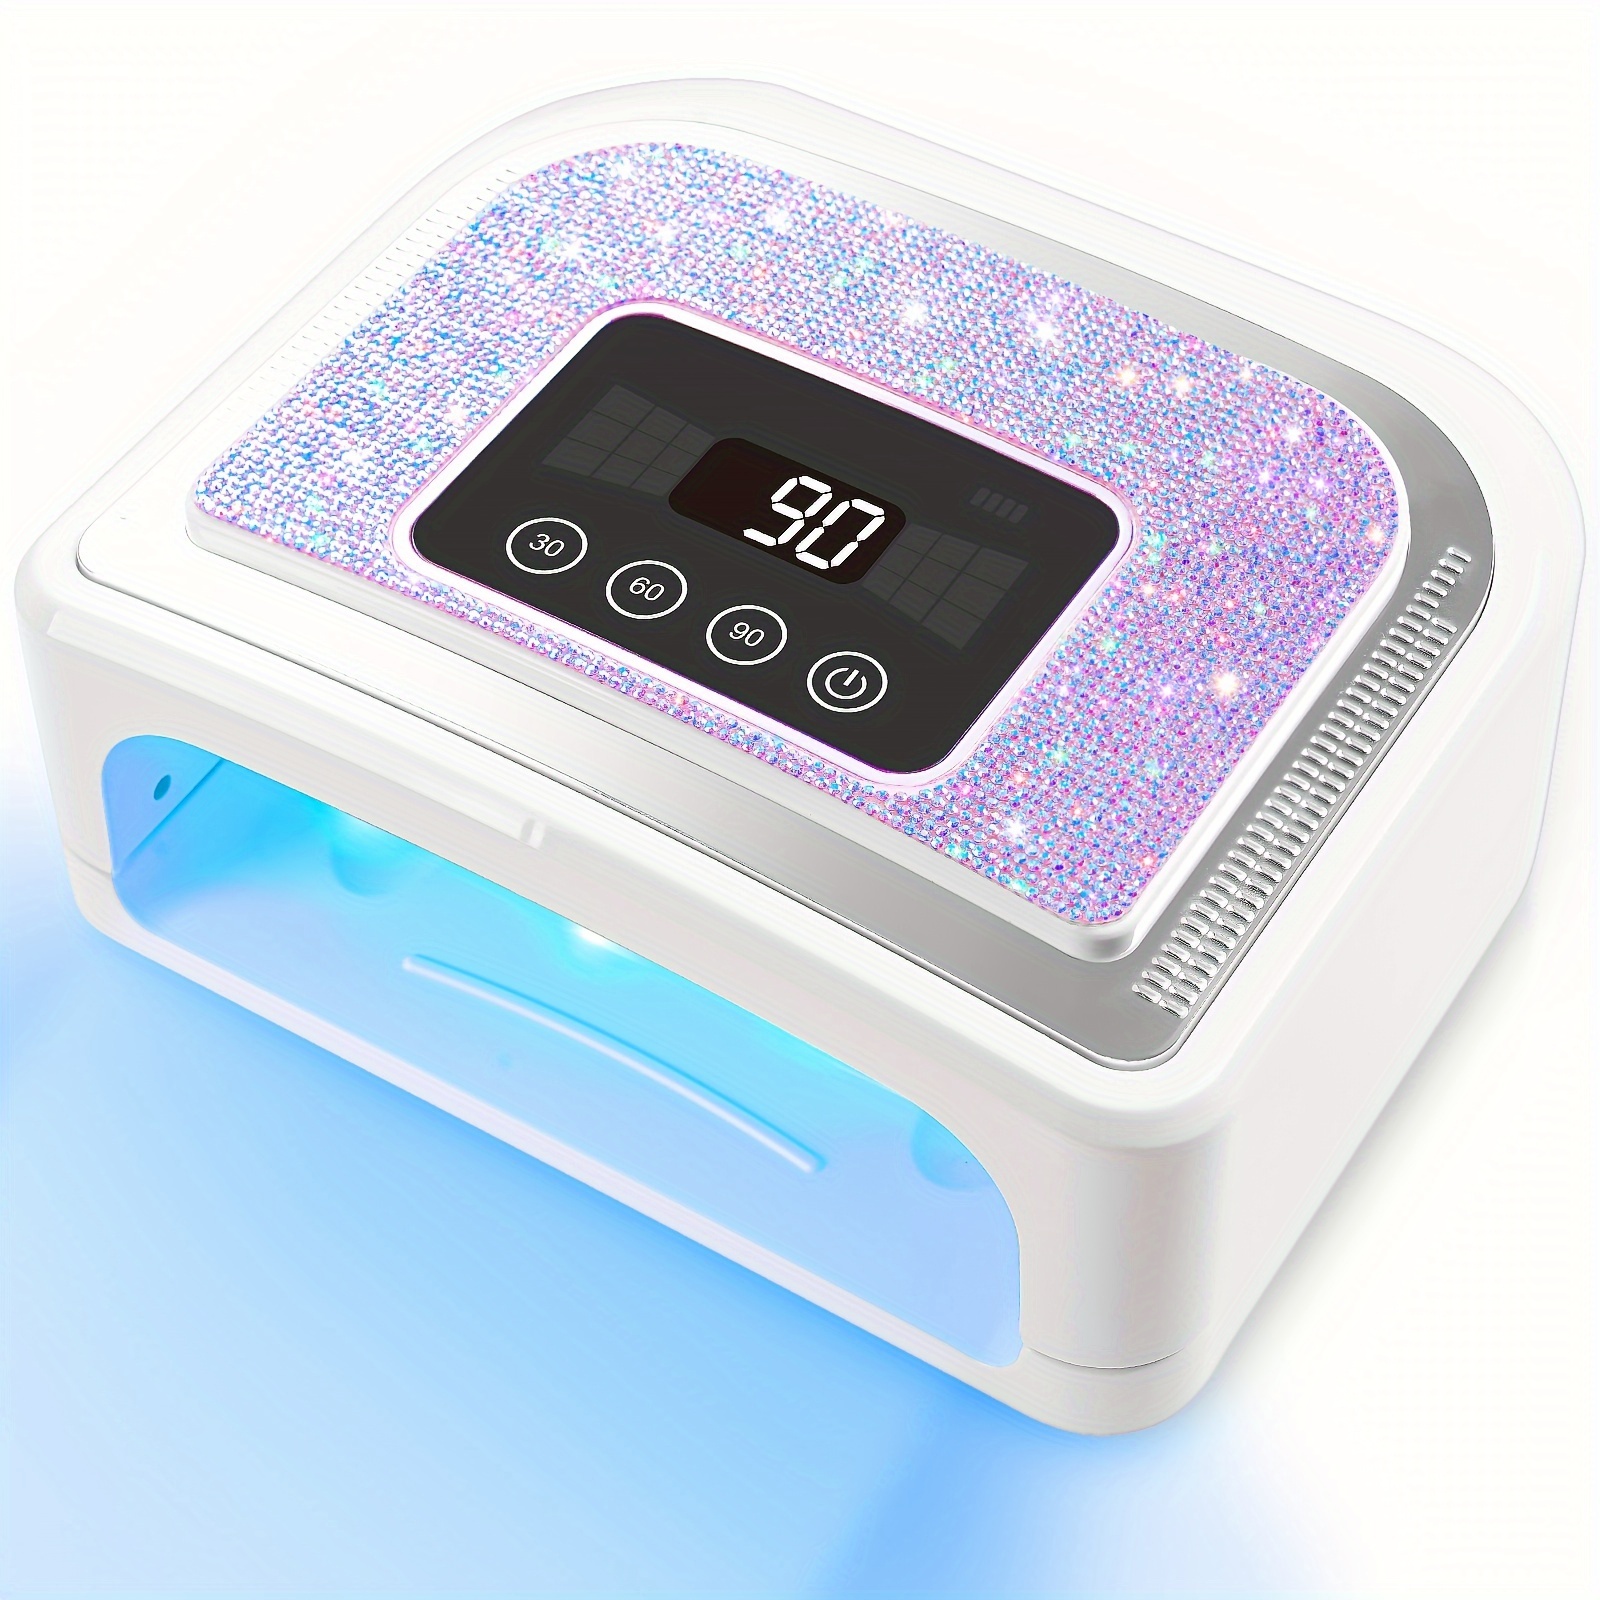 

120w Rechargeable Uv Nail Lamp For Gel Nails, Led Nail Lamp With 4 Timer Modes, Gel Nail Light Decorate With Sparkling Nail Rhinestones Diamond